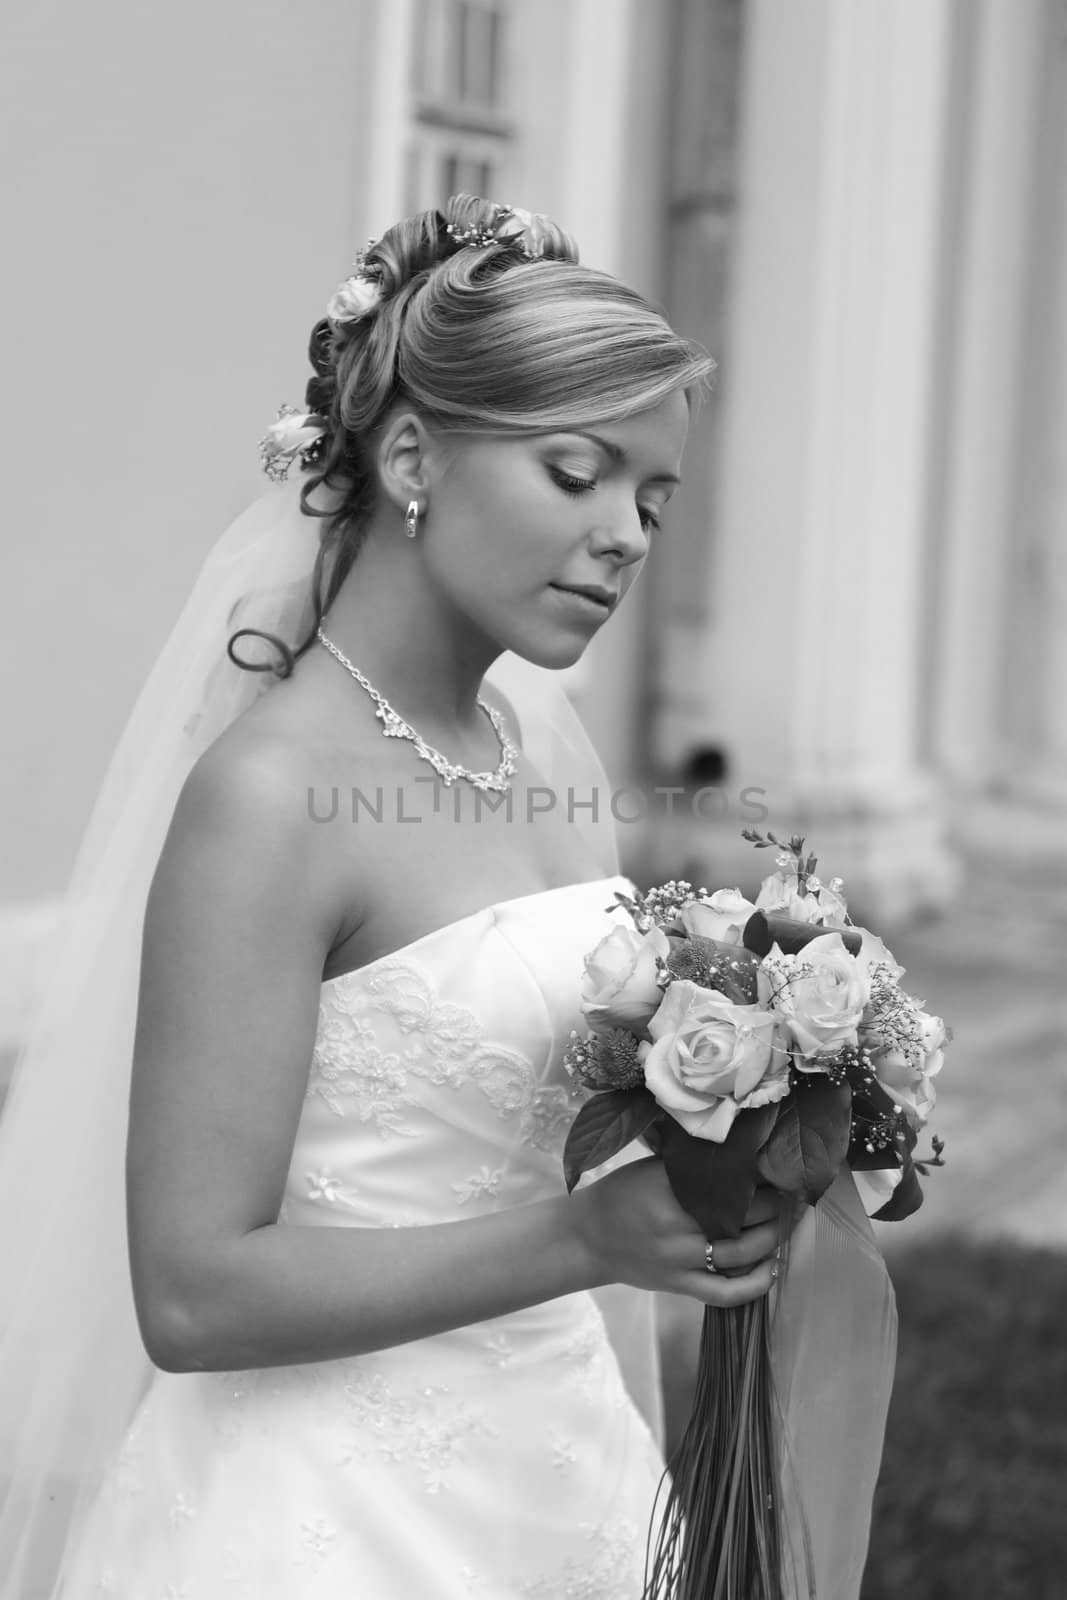 The beautiful bride with a bouquet from roses. b/w